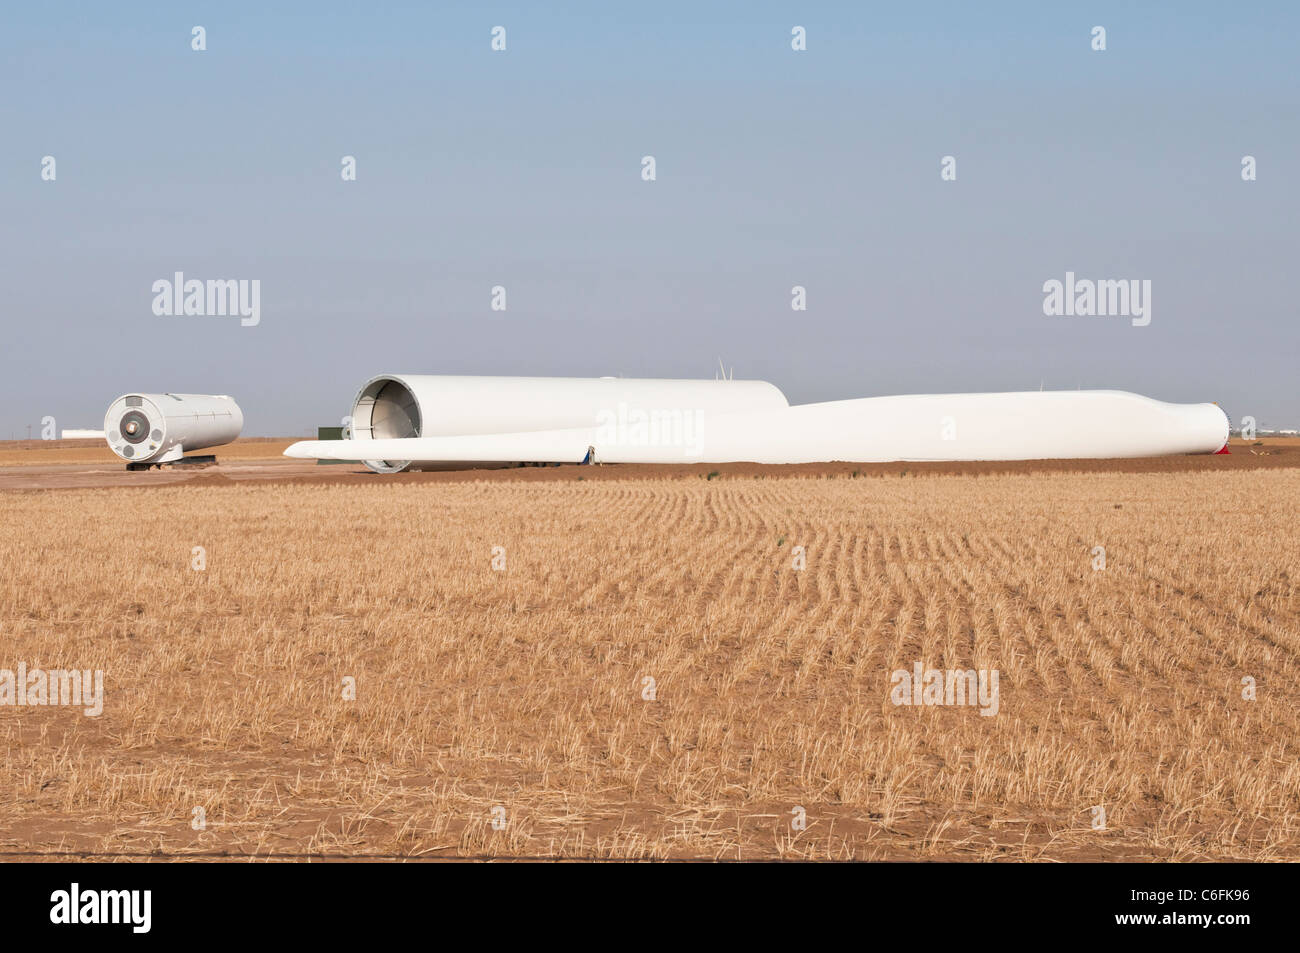 Components for a horizontal-axis wind turbine are shown on a construction site near Amarillo, Texas. Stock Photo